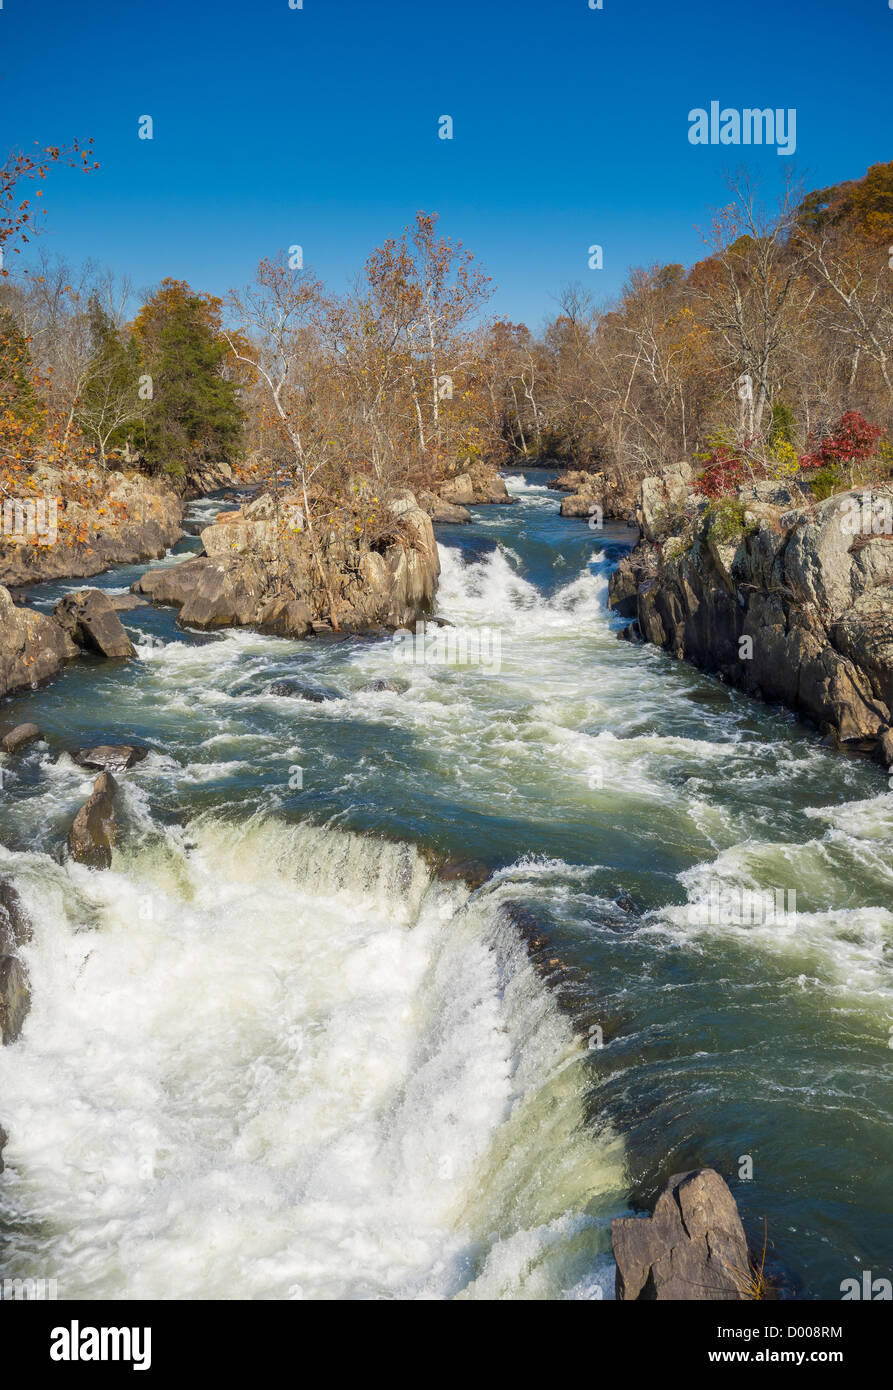 GREAT FALLS, MARYLAND, USA - Nebenfluss des Potomac River am Olmsted Insel. Stockfoto